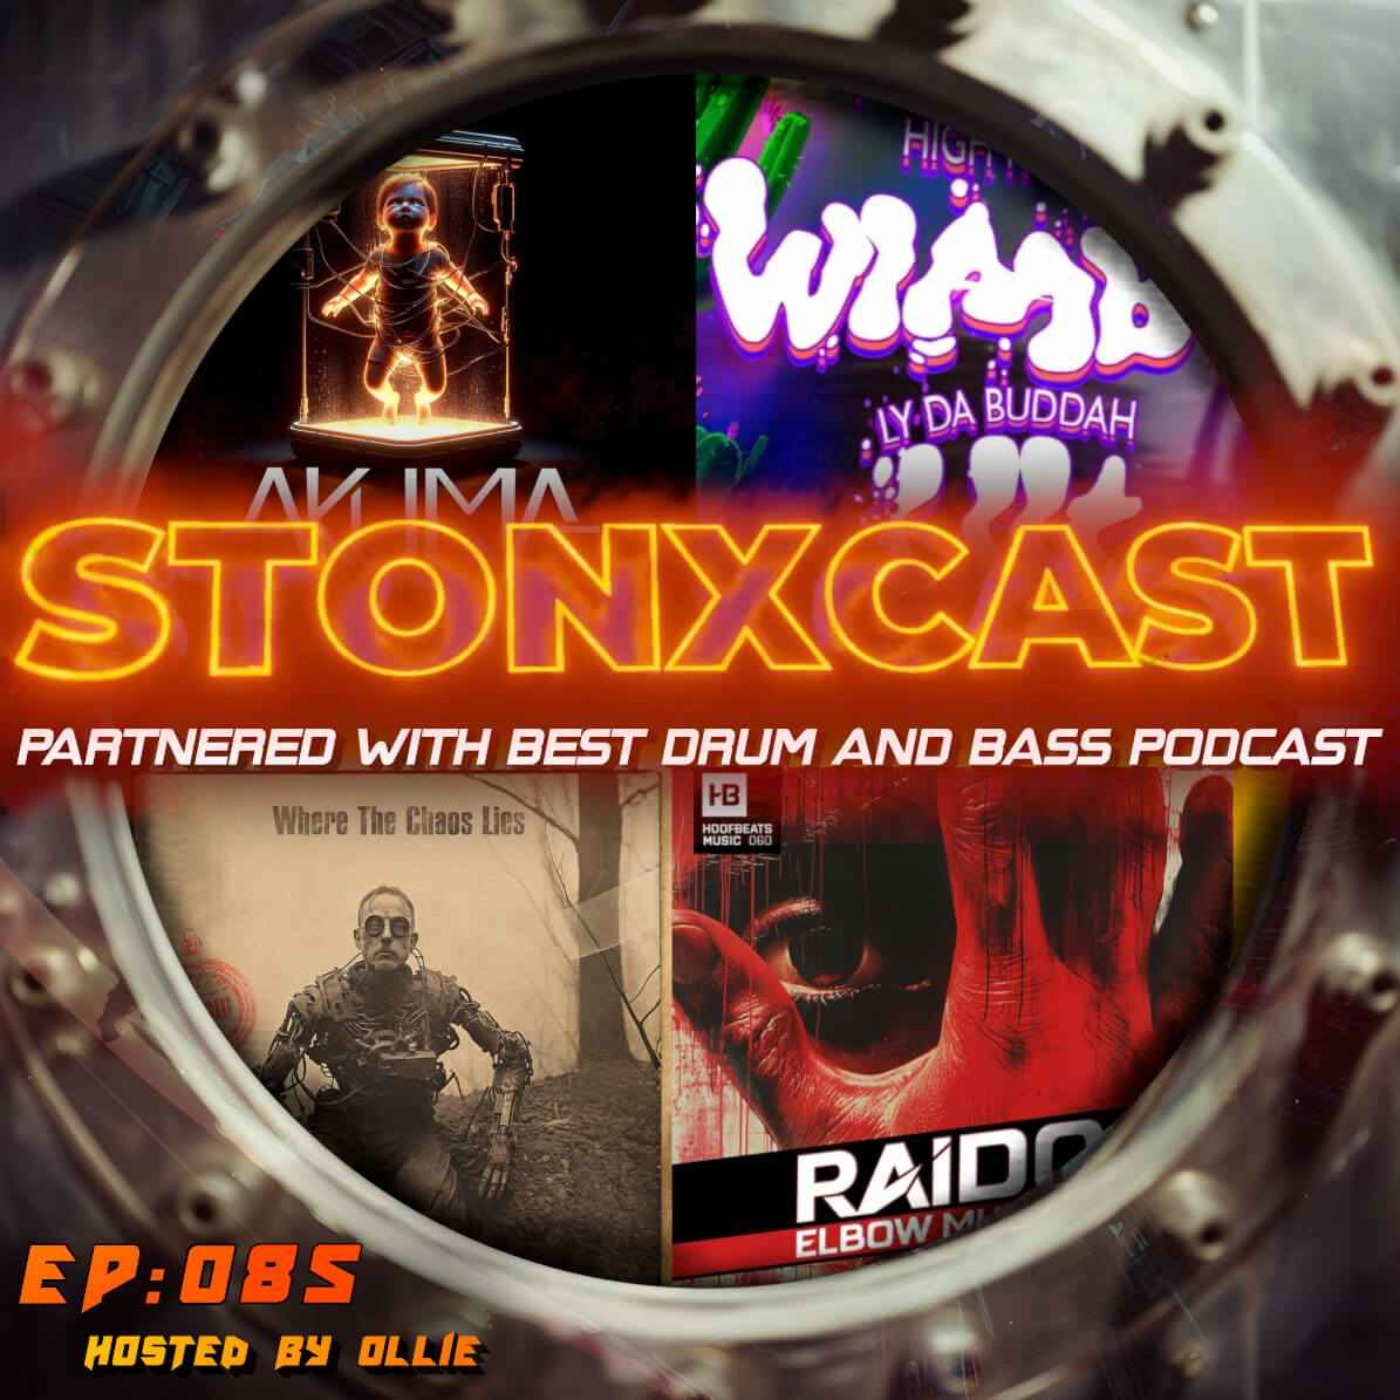 Stonxcast EP:085 - Hosted by Ollie Artwork